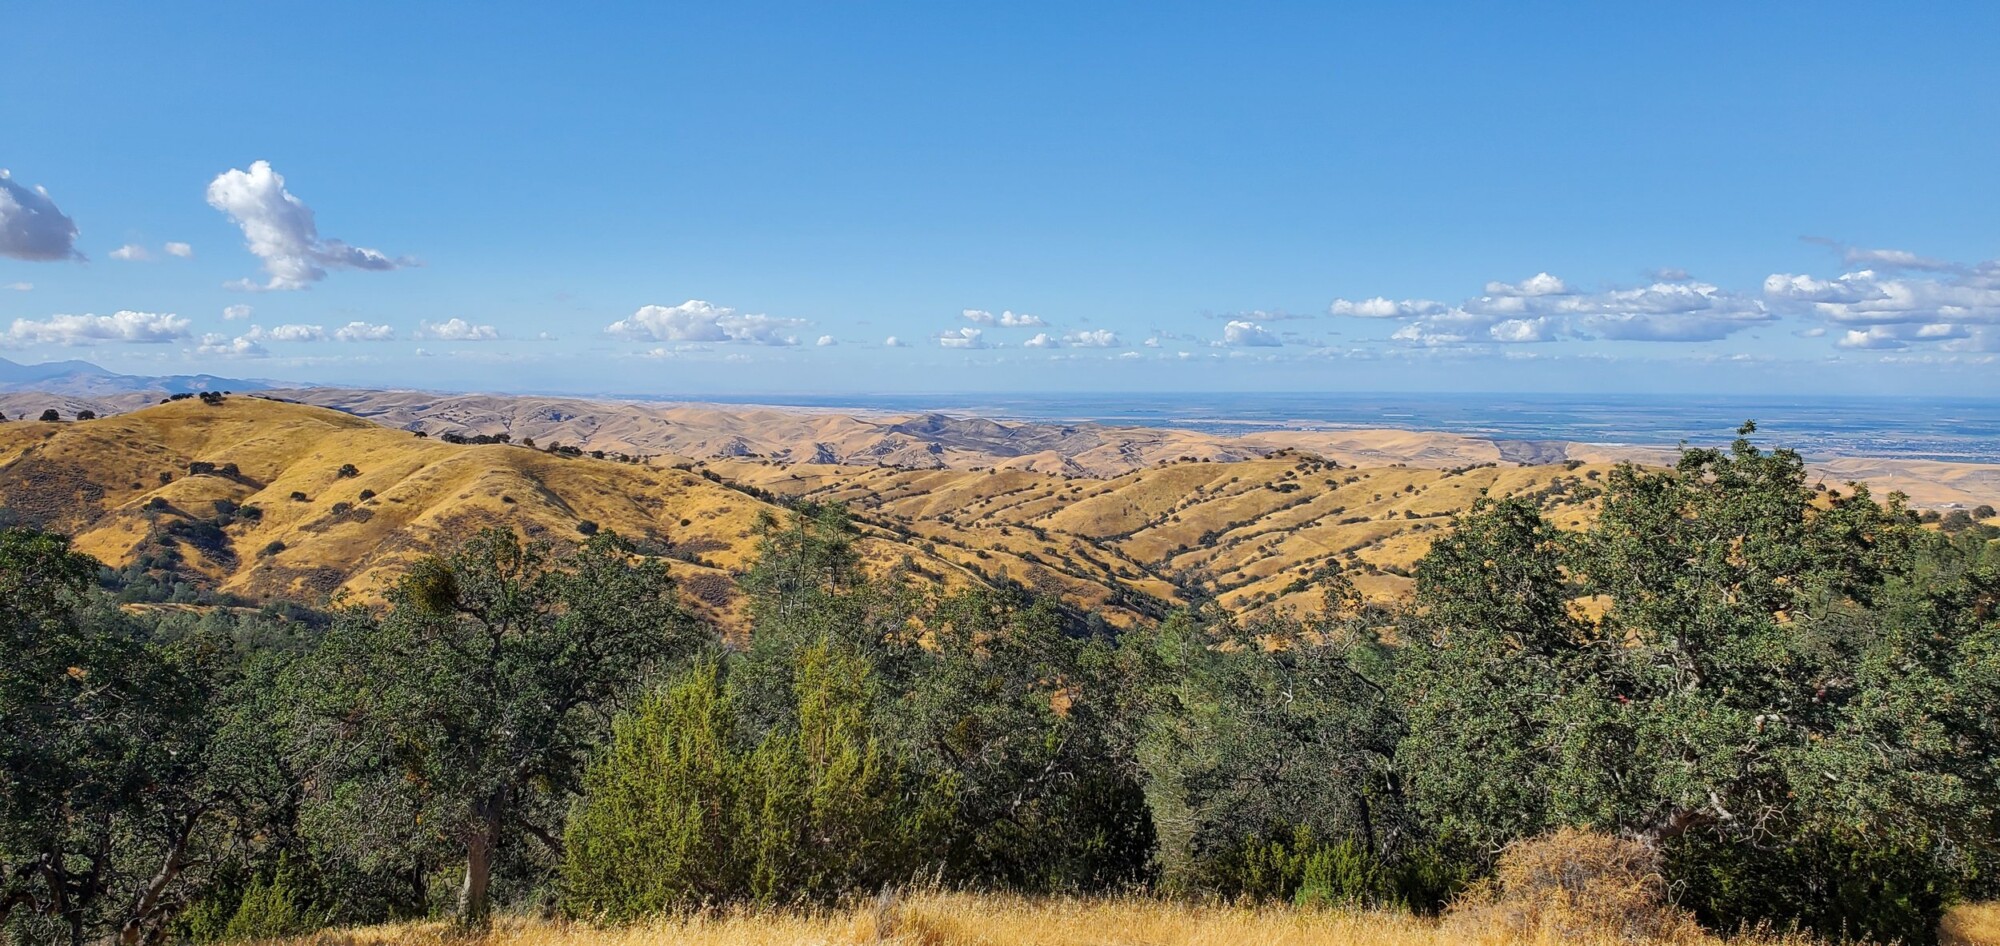 Looking out on the ranch’s golden rolling hills in the diablo range, with Mt. Diablo visible to the left of the photo and the Central Valley to the right, in summer with some clouds in the blue sky.